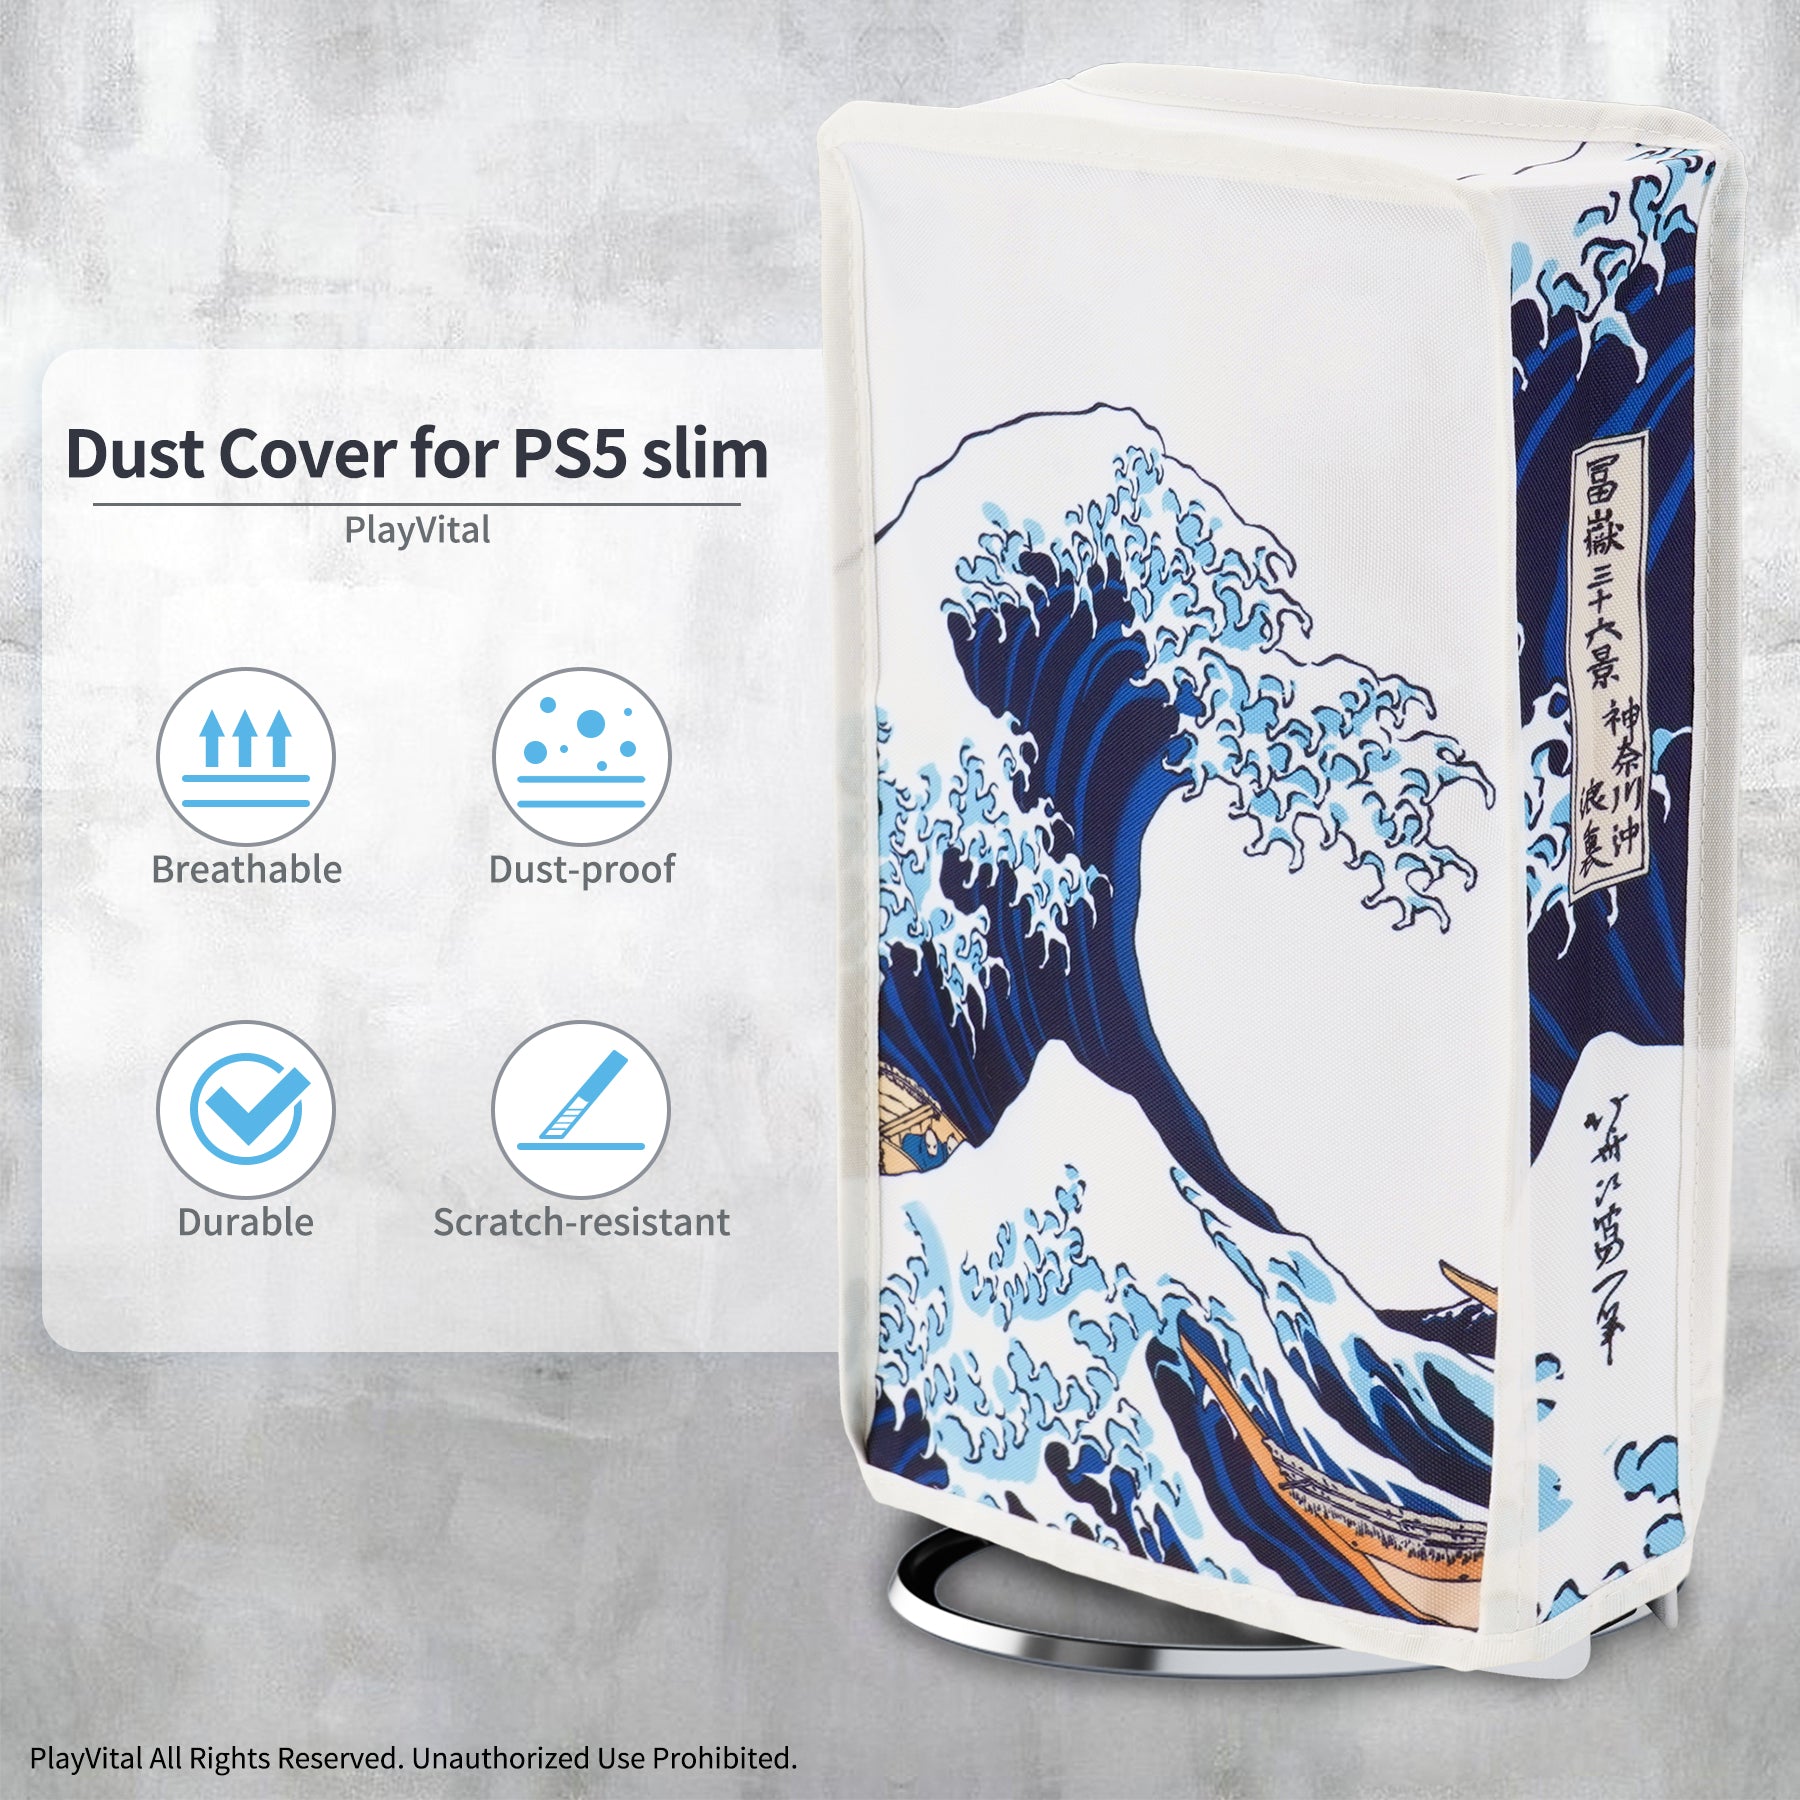 PlayVital Vertical Dust Cover for ps5 Slim Digital Edition(The New Smaller Design), Nylon Dust Proof Protector Waterproof Cover Sleeve for ps5 Slim Console - The Great Wave - JKSPFH001 PlayVital